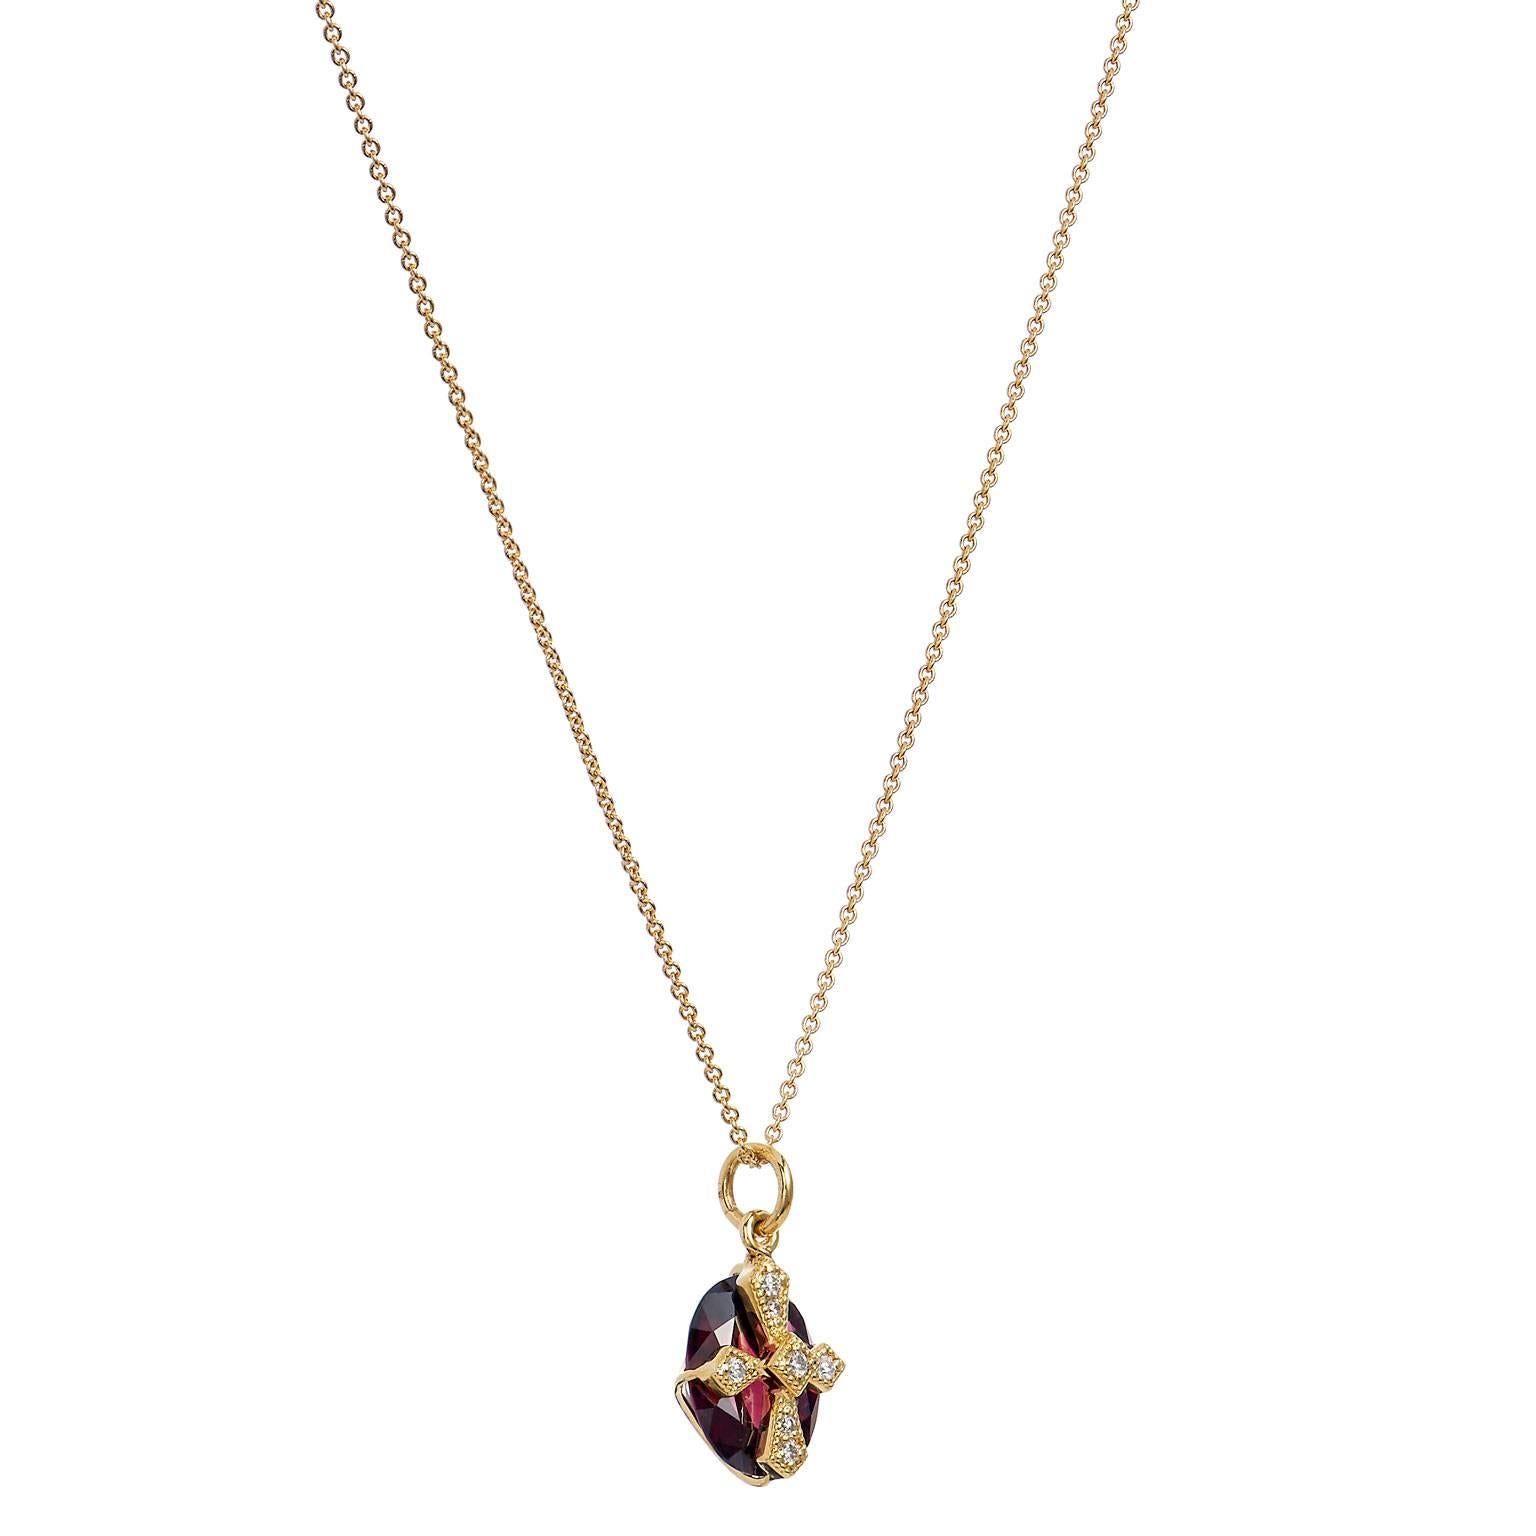 With a distinctive, elemental elegance, this Jude Frances kite over stone charm necklace. Seven round shaped diamonds, with a total weight of 0.05 carat, are set in luminous 18 karat yellow gold and affixed to exquisite rhodolite. This